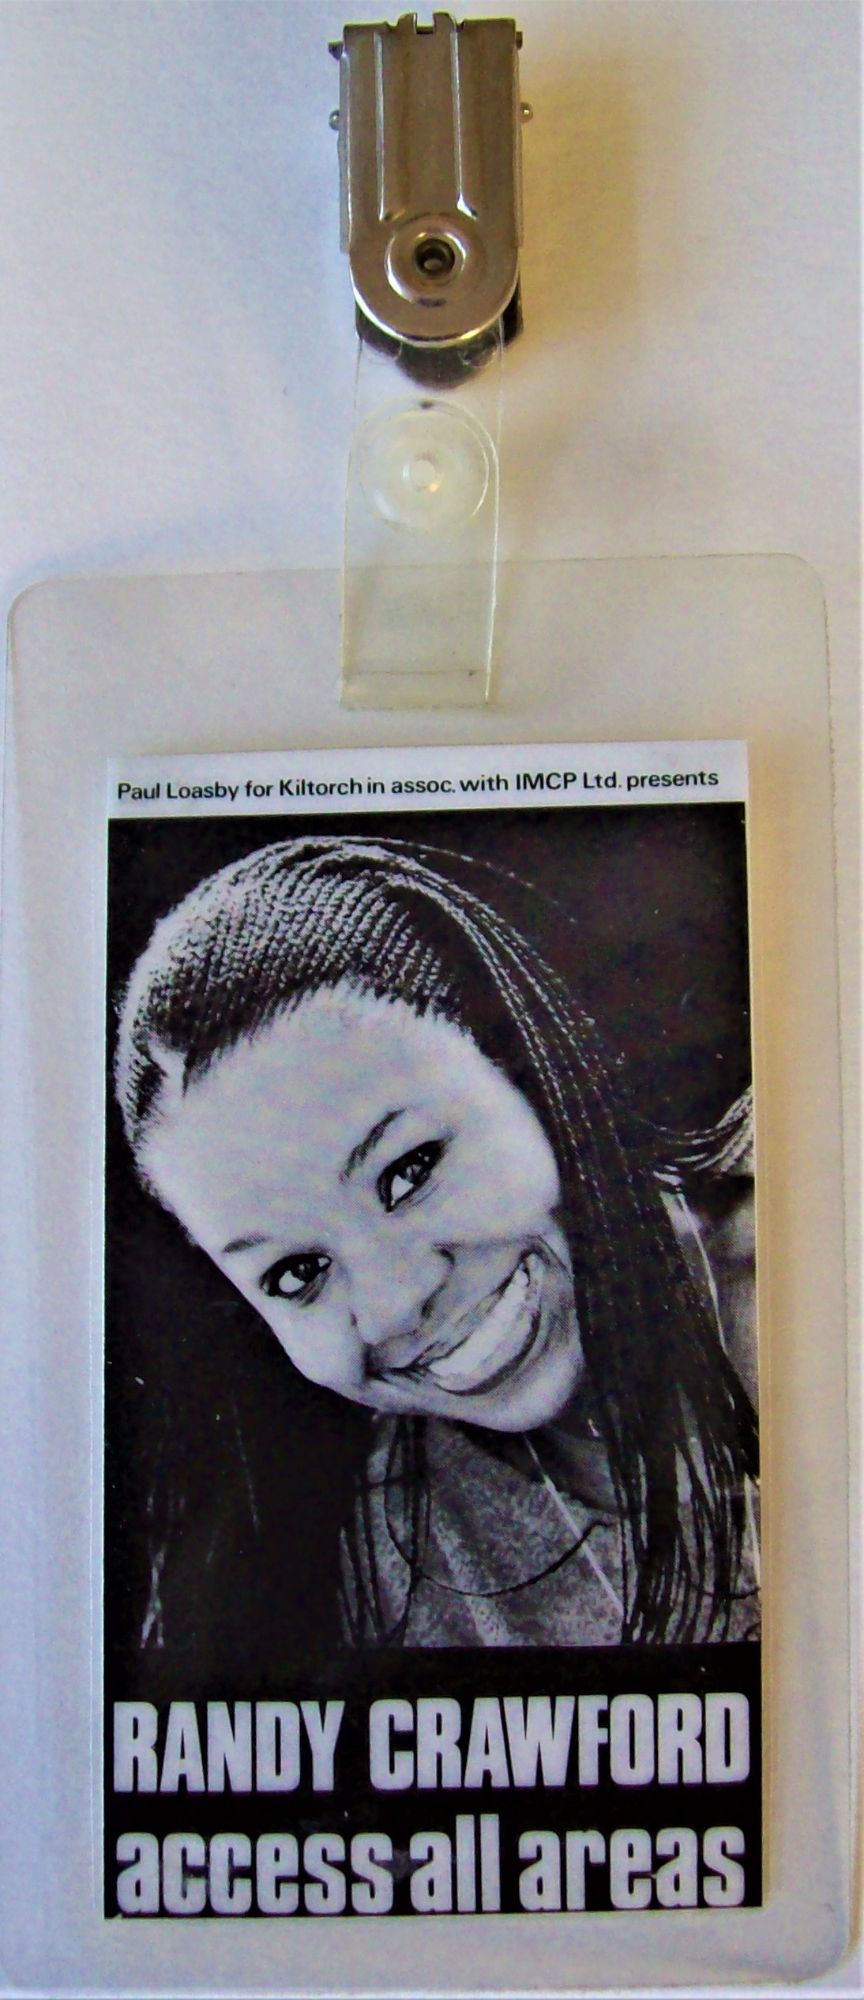 RANDY CRAWFORD SUPERB RARE ROAD CREW ISSUE AAA LAMINATE FOR THE UK TOUR IN 